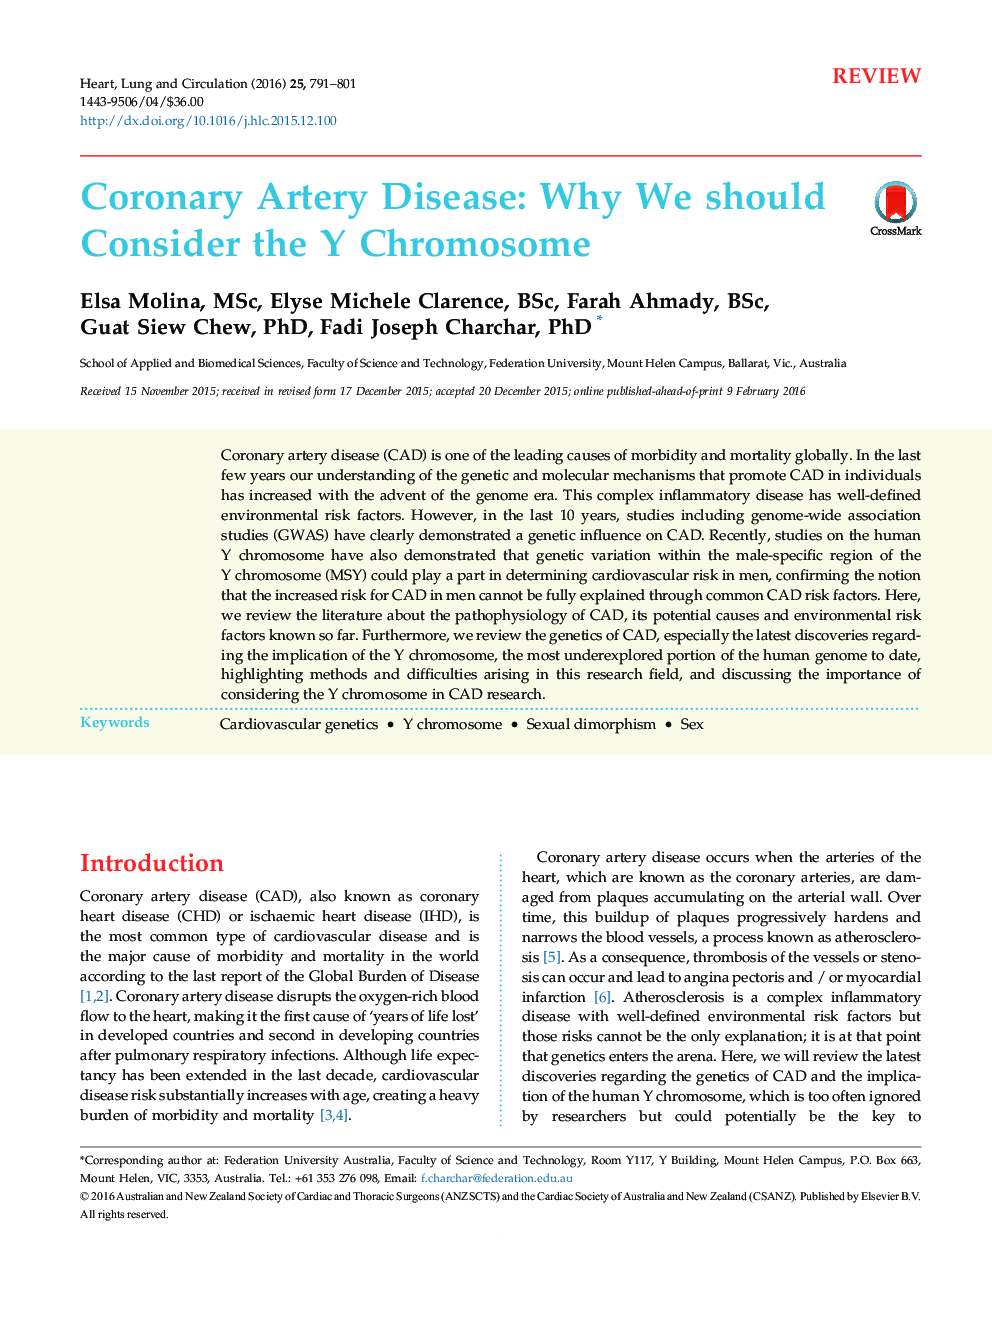 Coronary Artery Disease: Why We should Consider the Y Chromosome